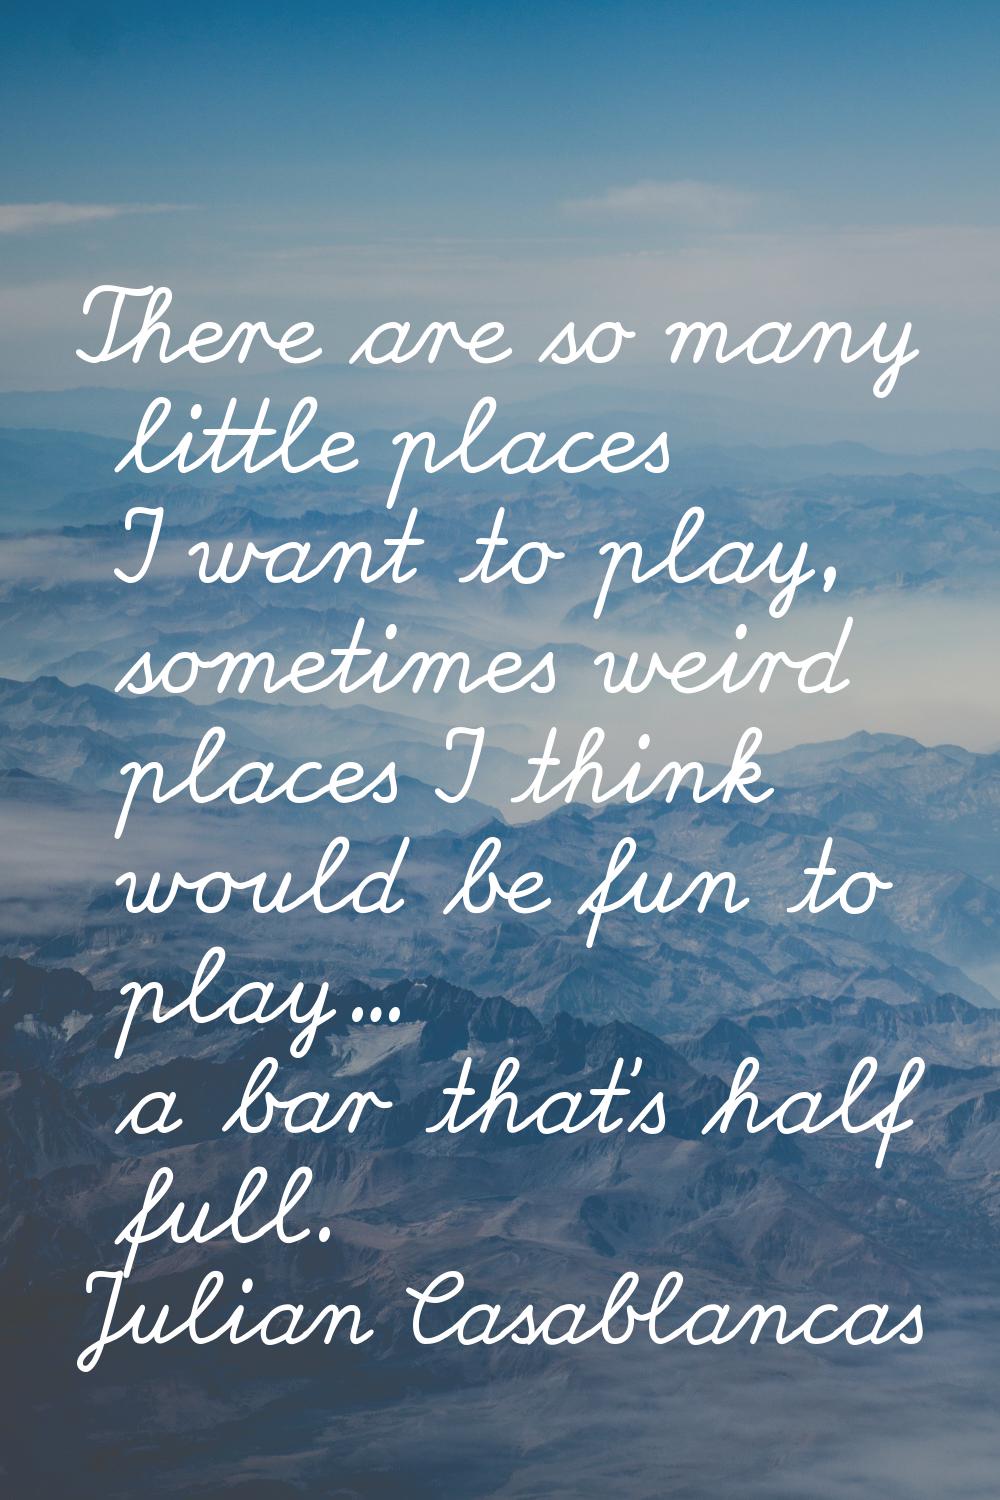 There are so many little places I want to play, sometimes weird places I think would be fun to play